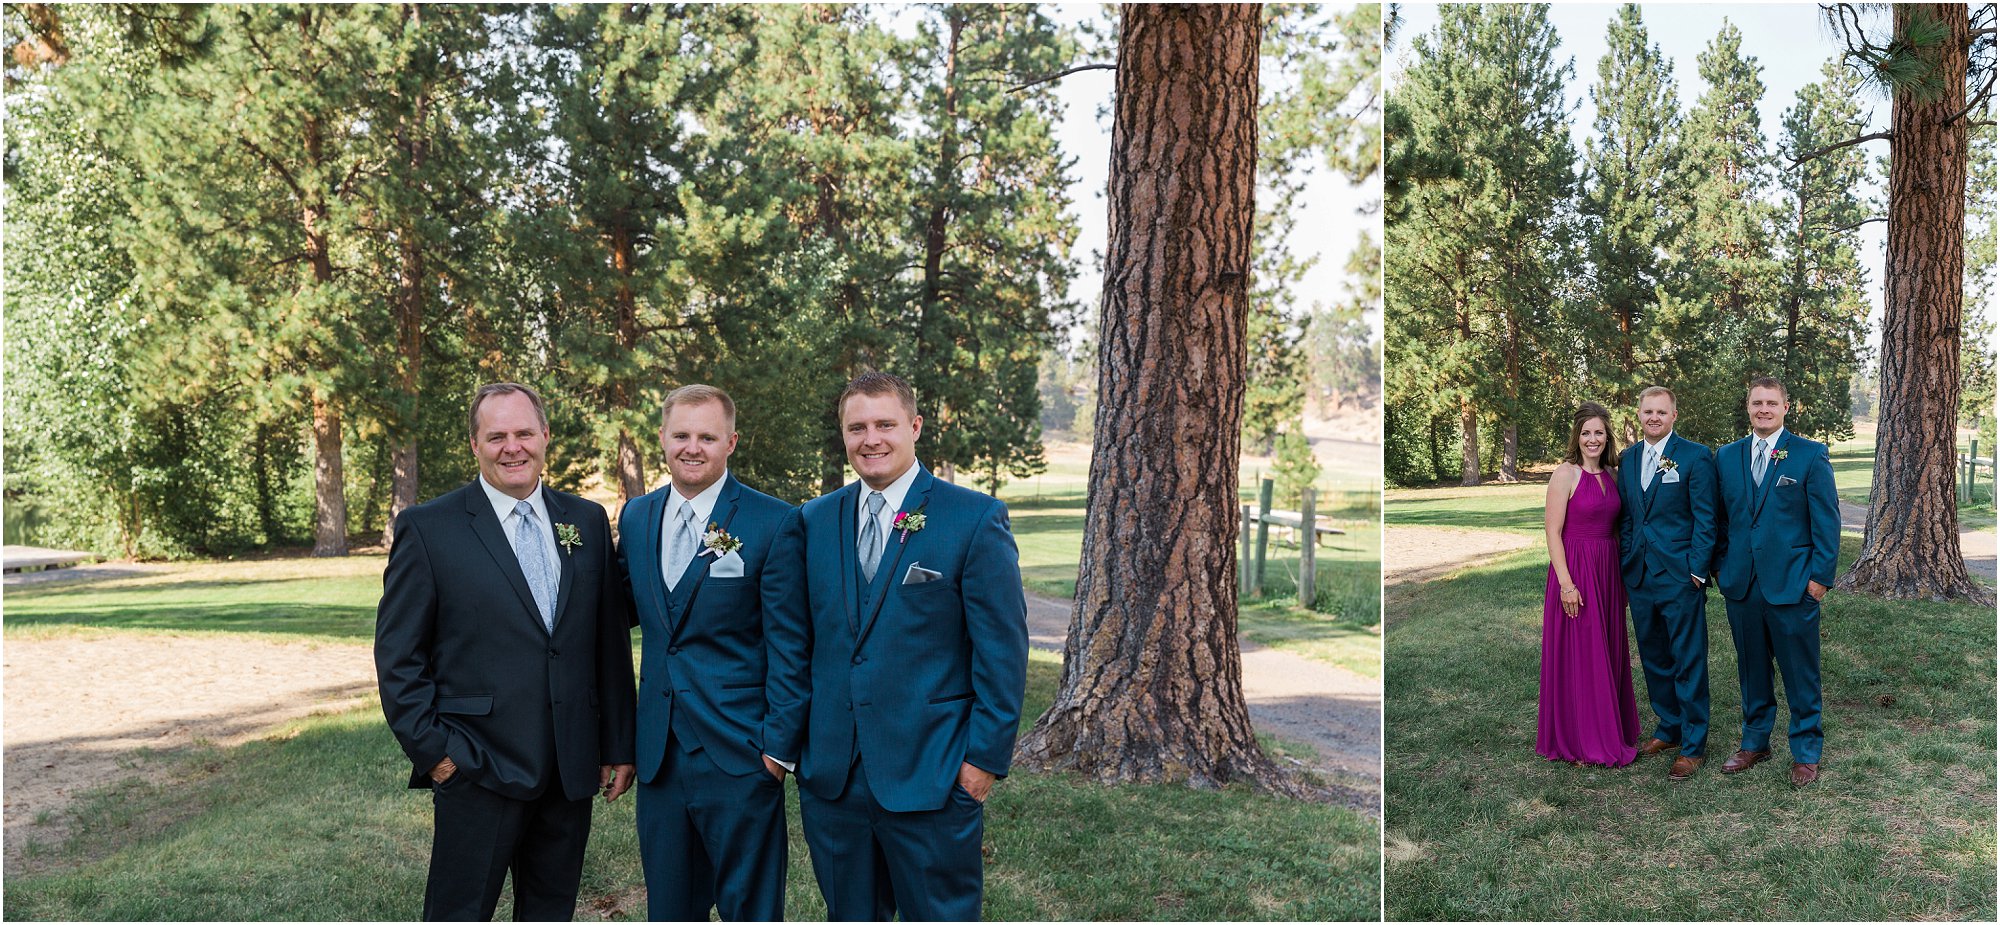 The groom, his brother, his sister and his father pose for a formal portrait at his Bend, Oregon outdoor wedding. | Erica Swantek Photography